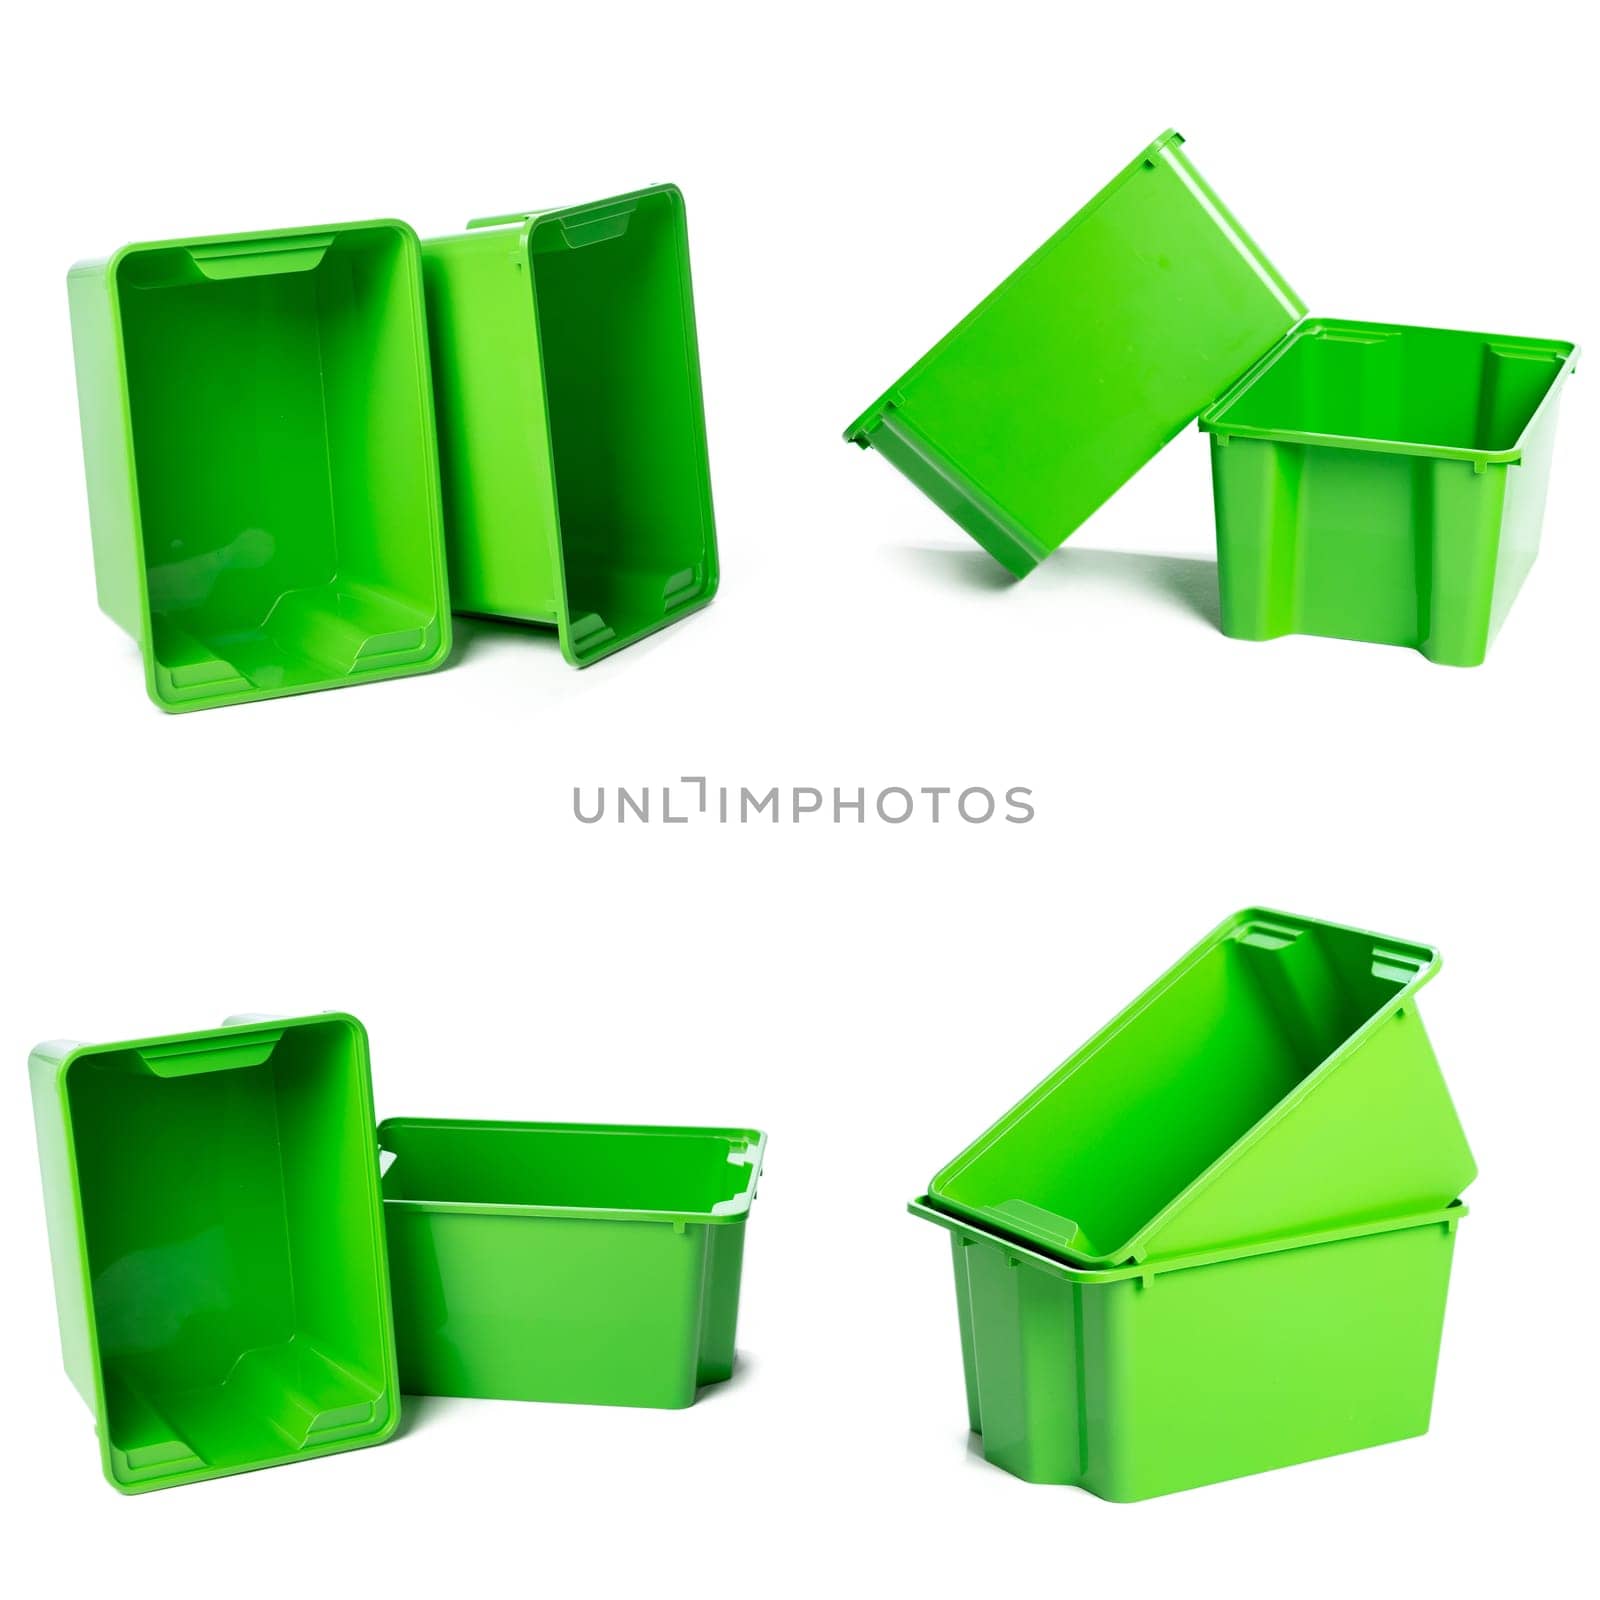 toolbox on white background by Fabrikasimf